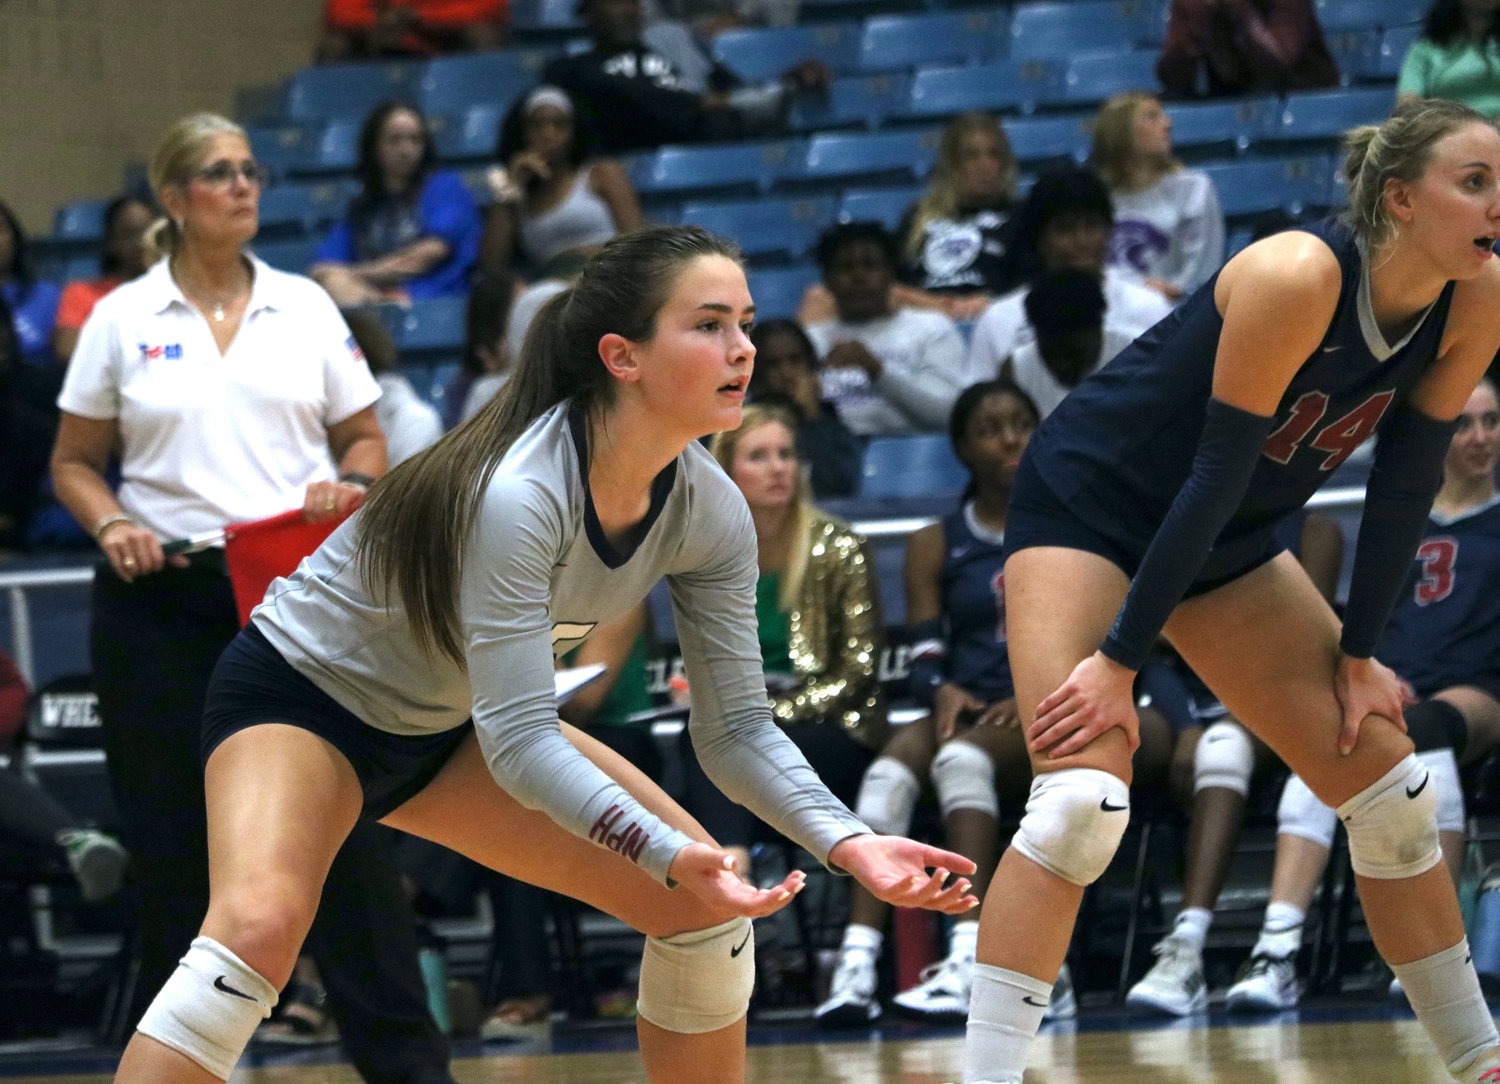 Brooklynn Merrell gets ready for an incoming serve during Tuesday's match between Tompkins and Ridge Point at Wheeler Field House.